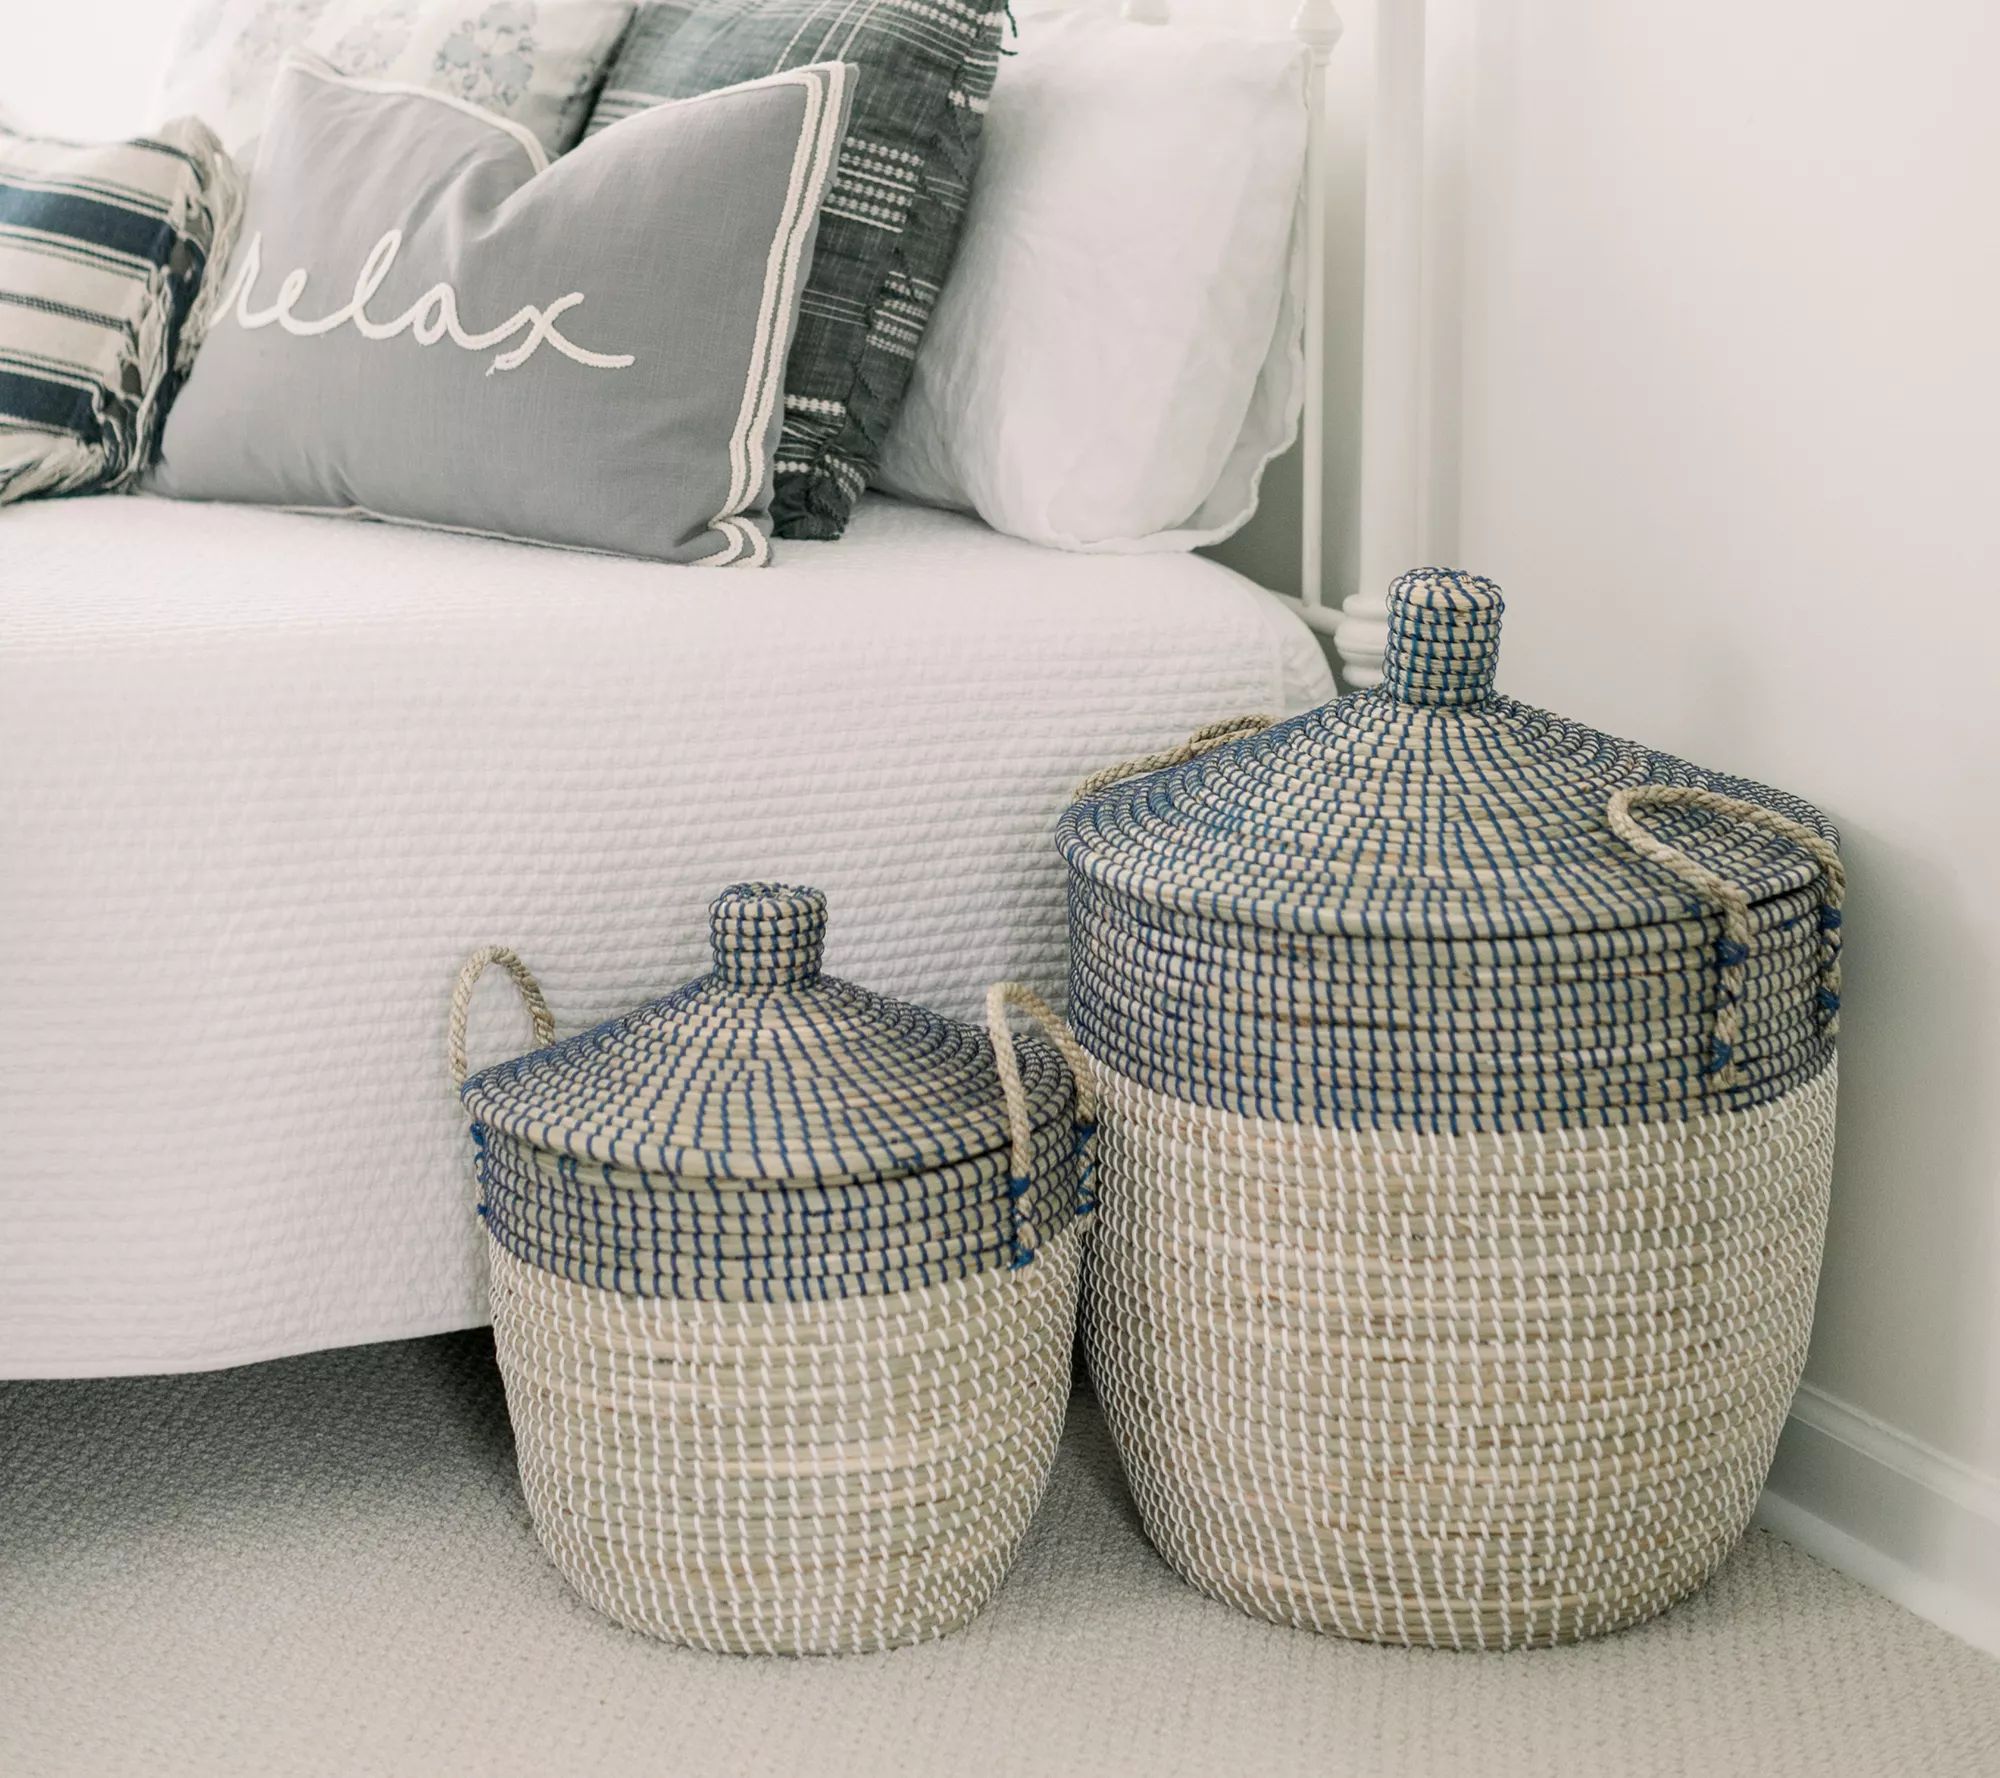 Set of 2 Seagrass Baskets with Lids by Lauren McBride | QVC